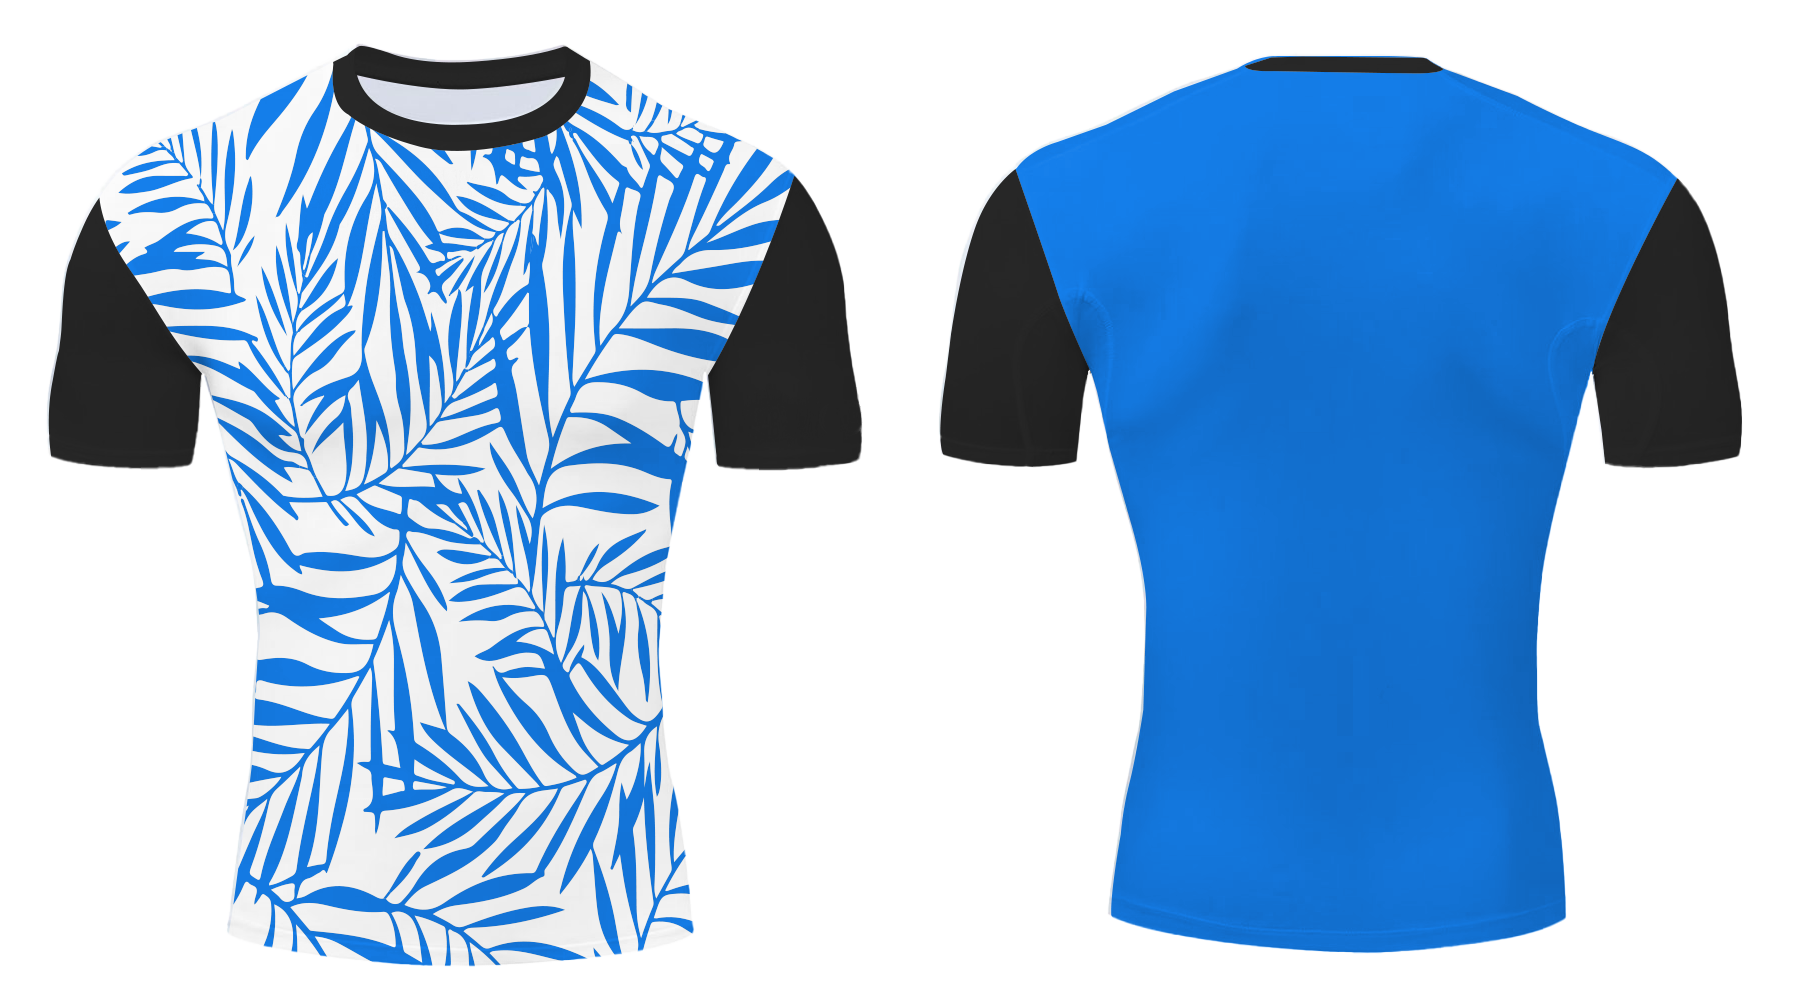 Custom Leaves Design Adult Youth Unisex Compression Shirt Questions & Answers